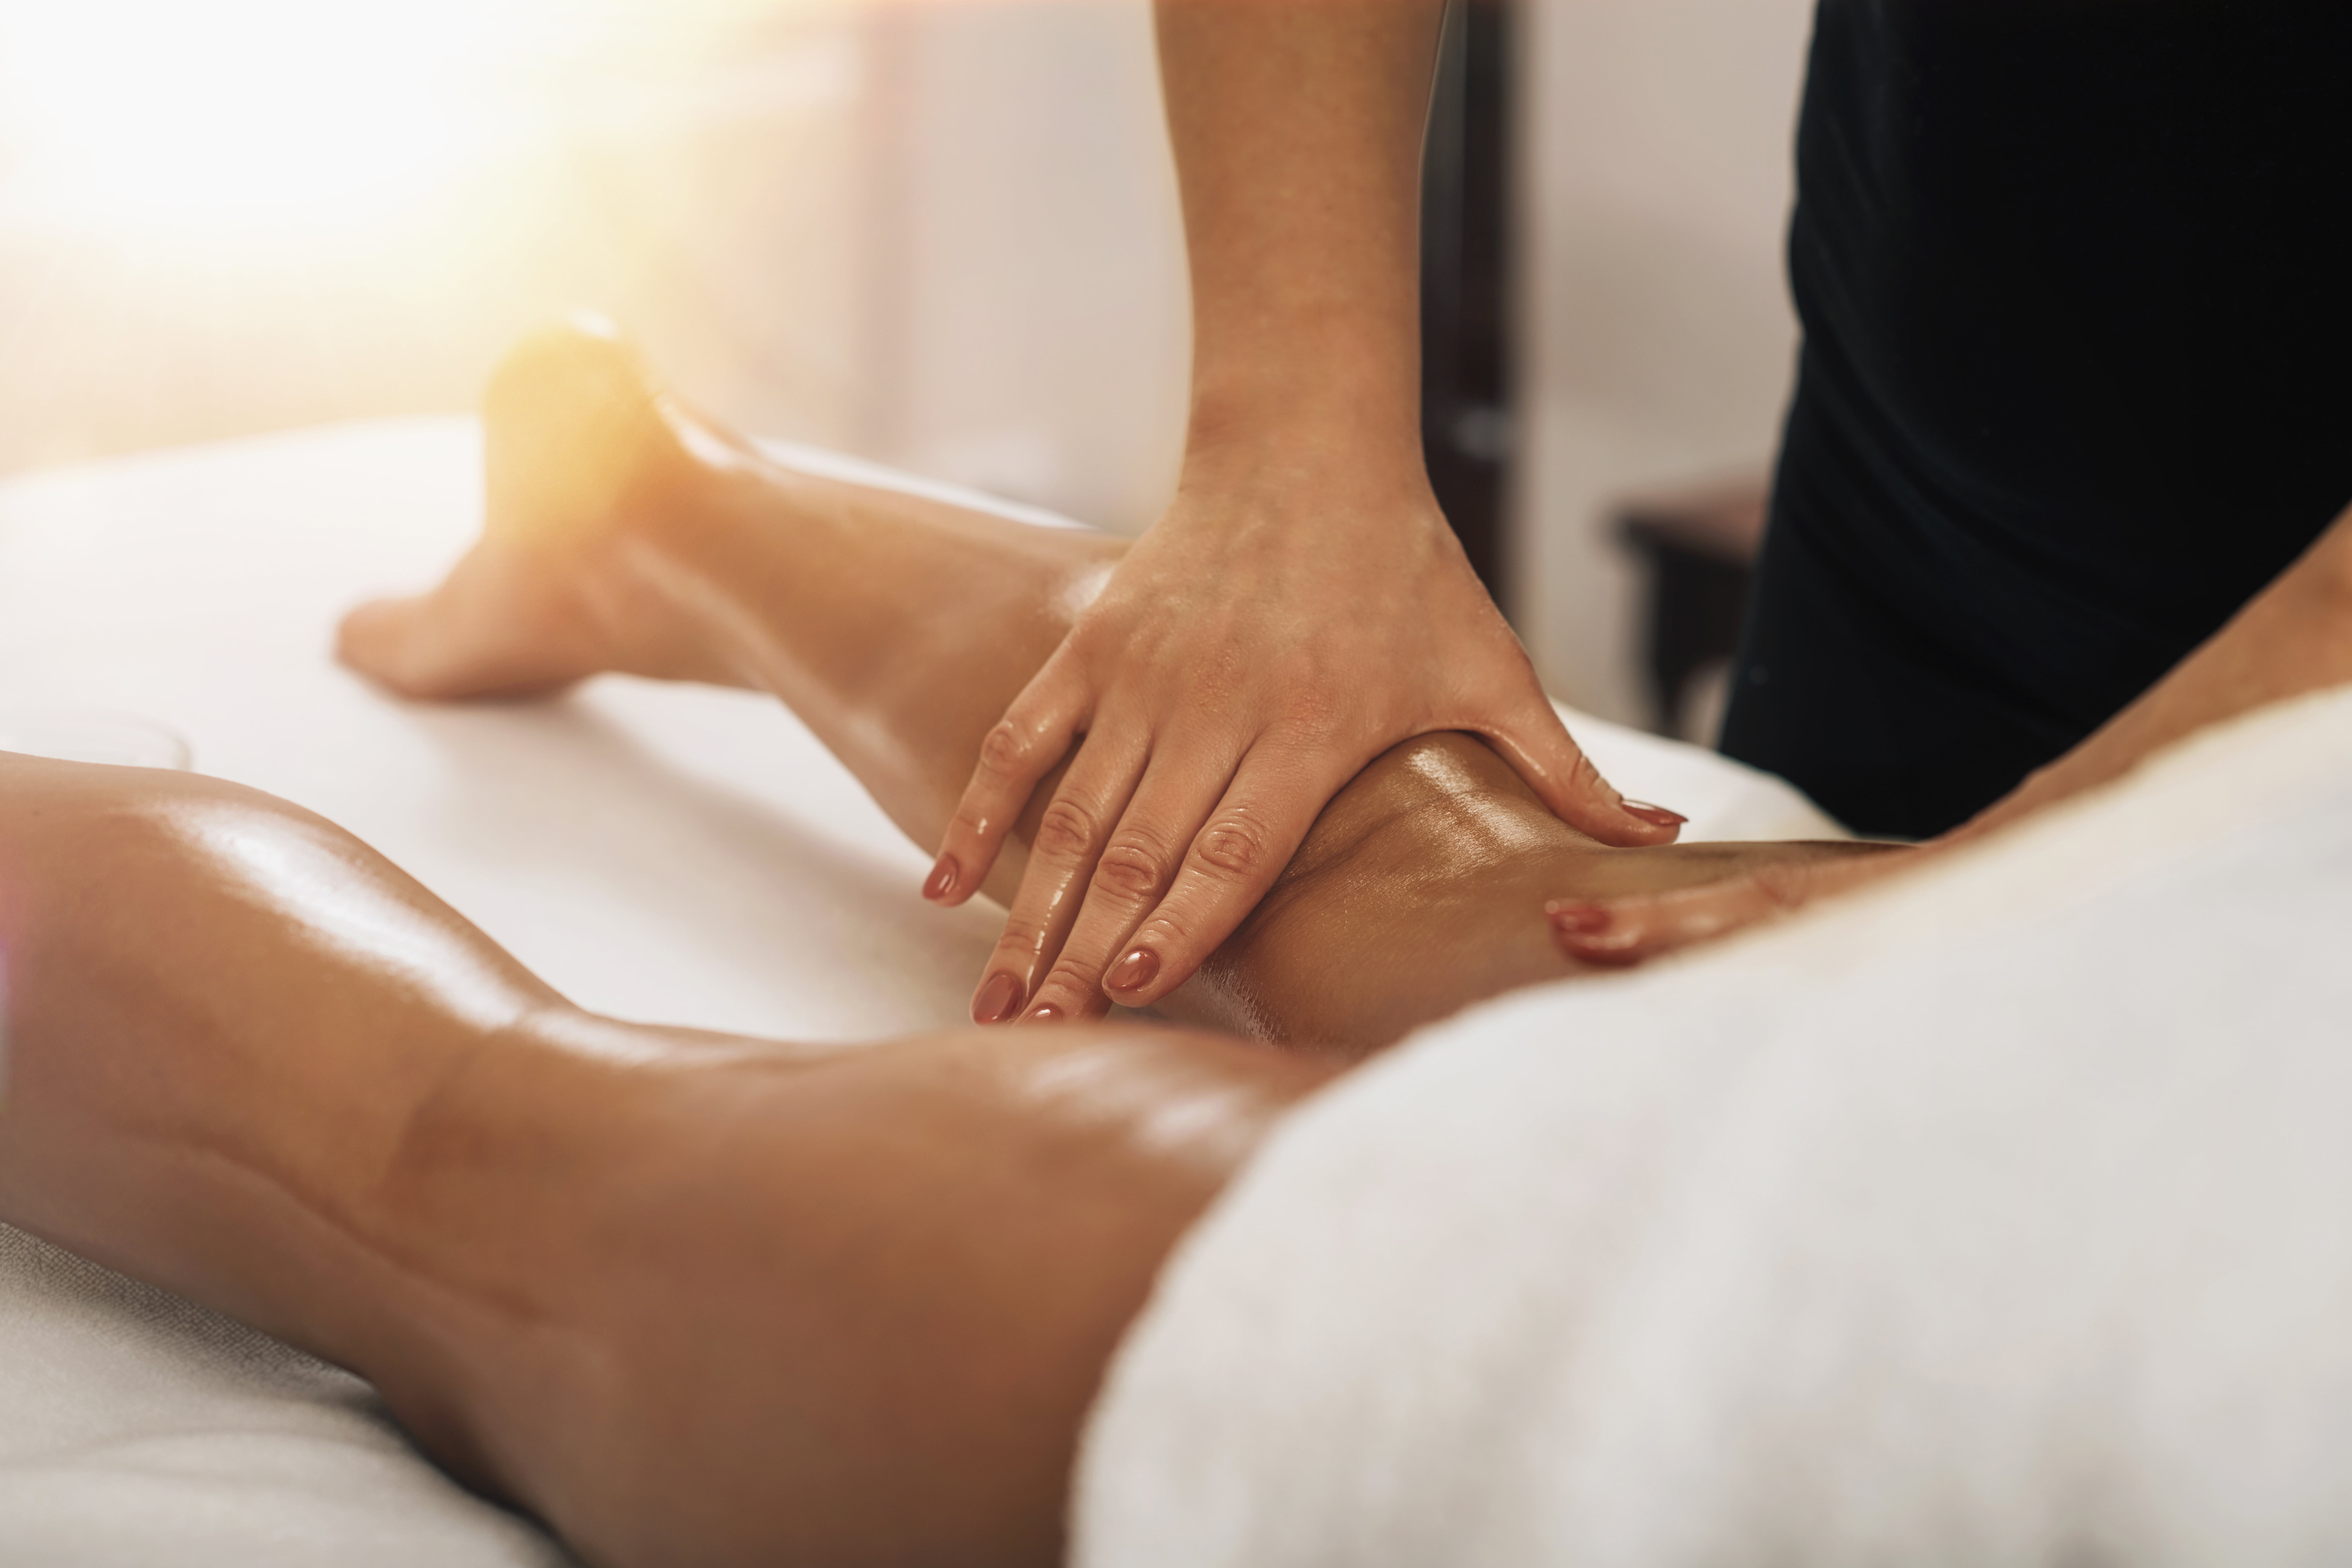 Why Do I Feel Sick After a Massage?